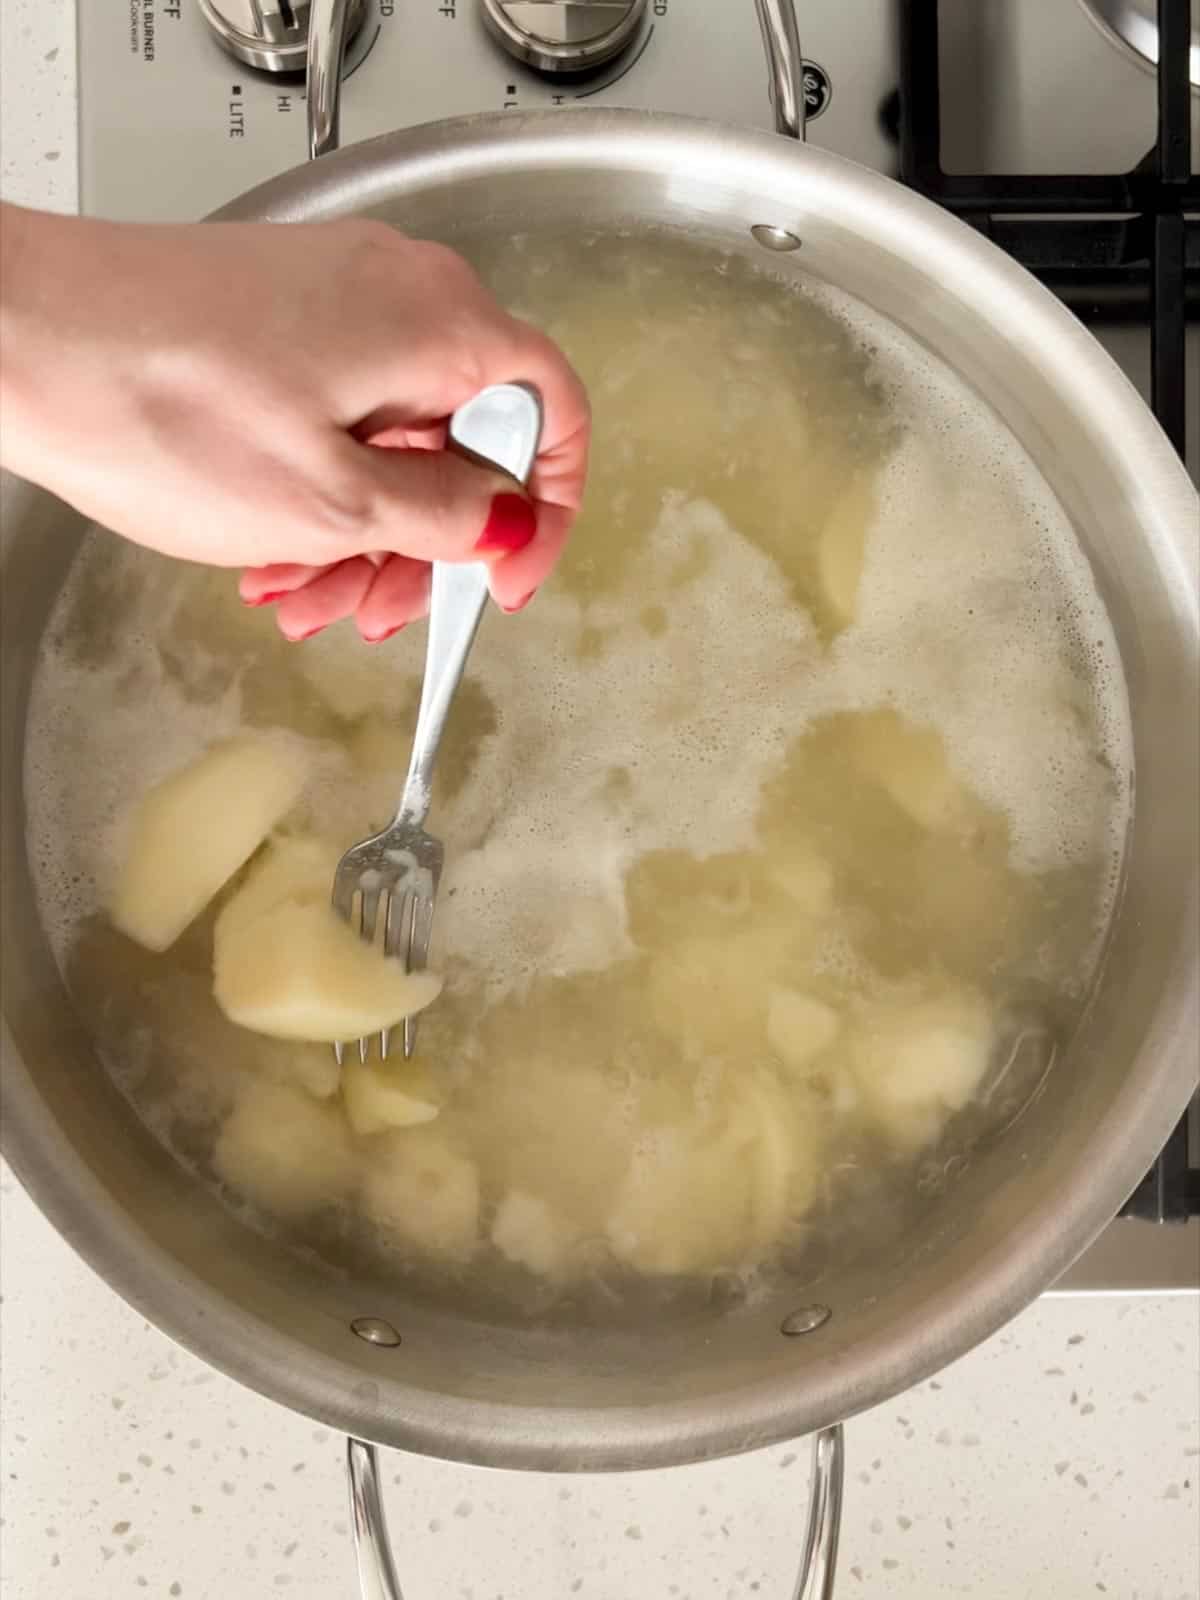 Potatoes boiling in a pot with a fork piercing one of the potatoes.